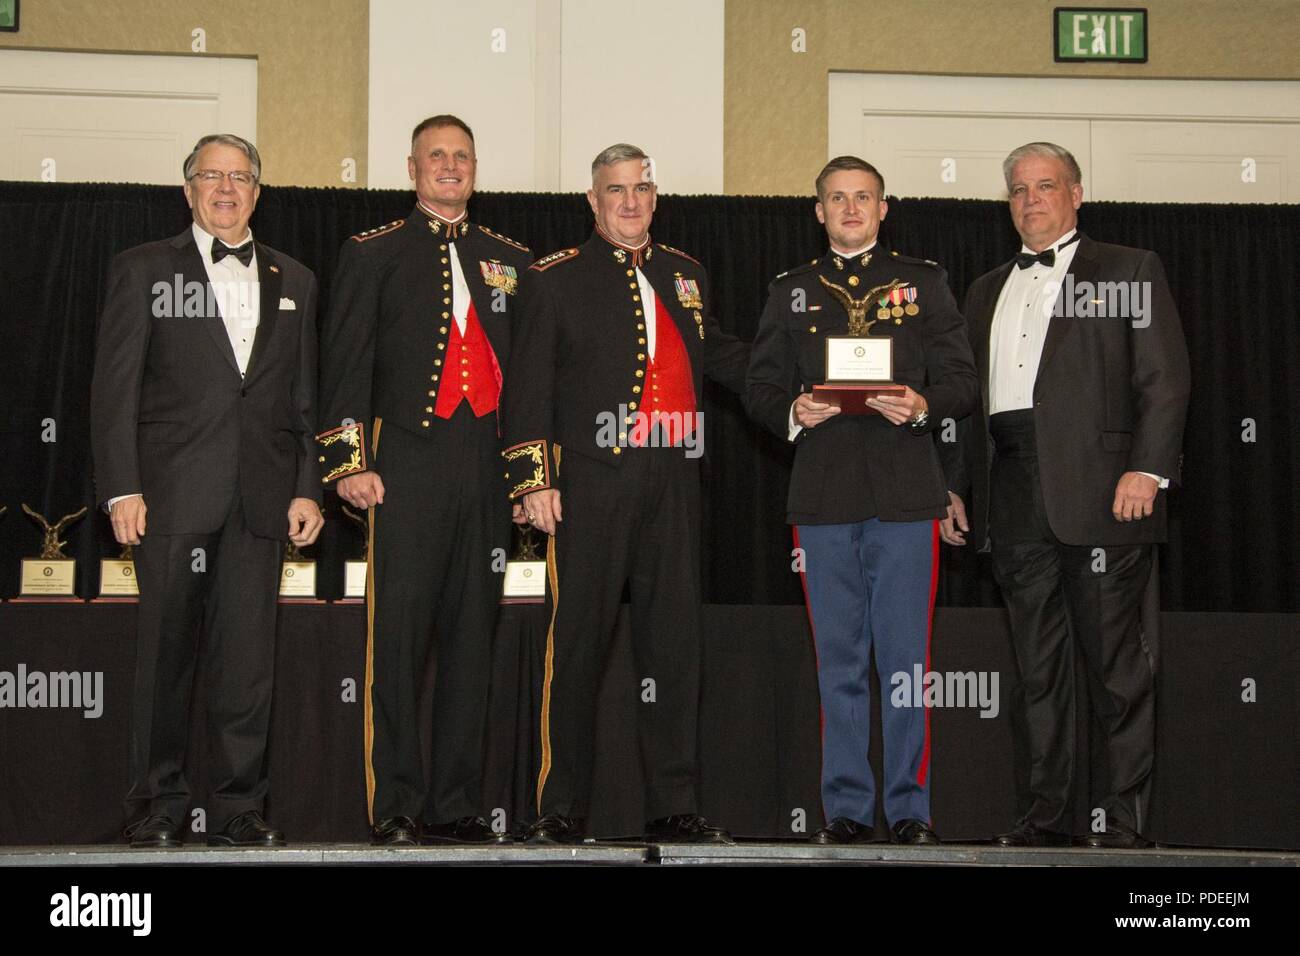 The Assistant Commandant of the Marine Corps Gen. Glenn M. Walters, middle, presents the James Maguire Award for exceptional achievement in Marine Aviation to Capt. Joshua P. Brooks, second from right, ACT officer in charge, Department of Operational Safety and Standardization (DOSS), Marine Unmanned Aerial Vehicle Squadron 3 (VMU-3), Marine Aircraft Group 24 (MAG-24), during the 47th annual Marine Corps Aviation Association (MCAA) Symposium and Awards Banquet, San Diego, Calif., May 18, 2018. Walters was the guest speaker for the event and presented 13 unit awards and 16 individual awards dur Stock Photo